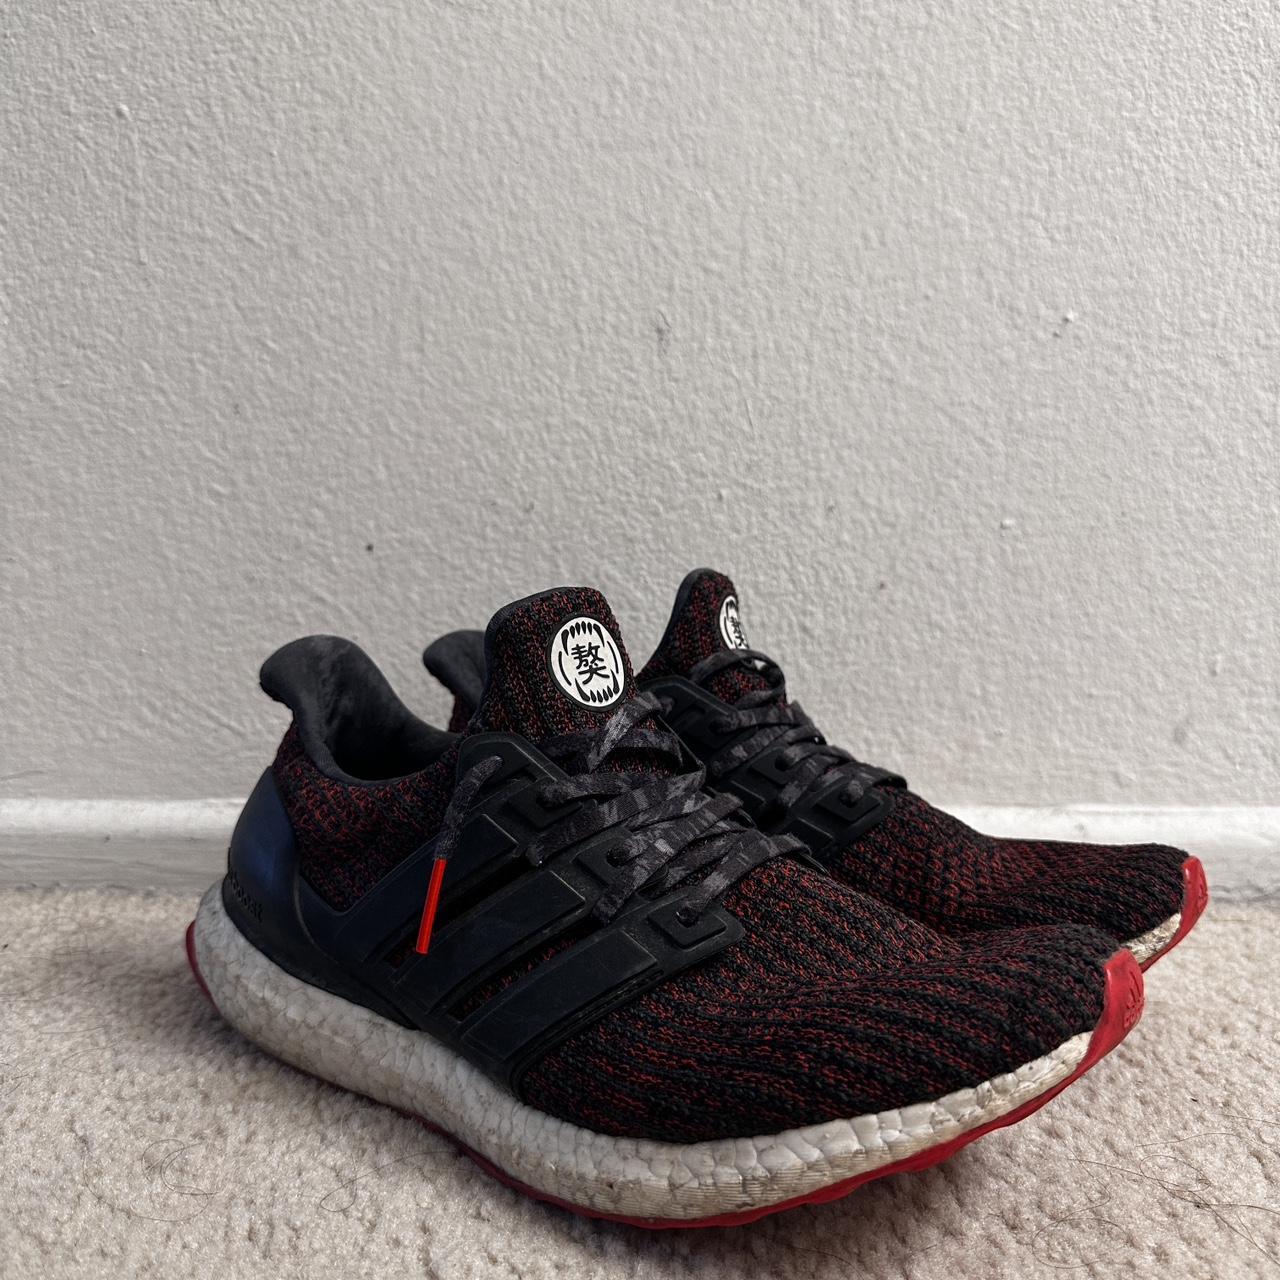 Adidas Ultraboost 4.0 (Chinese new year LIMITED - Depop